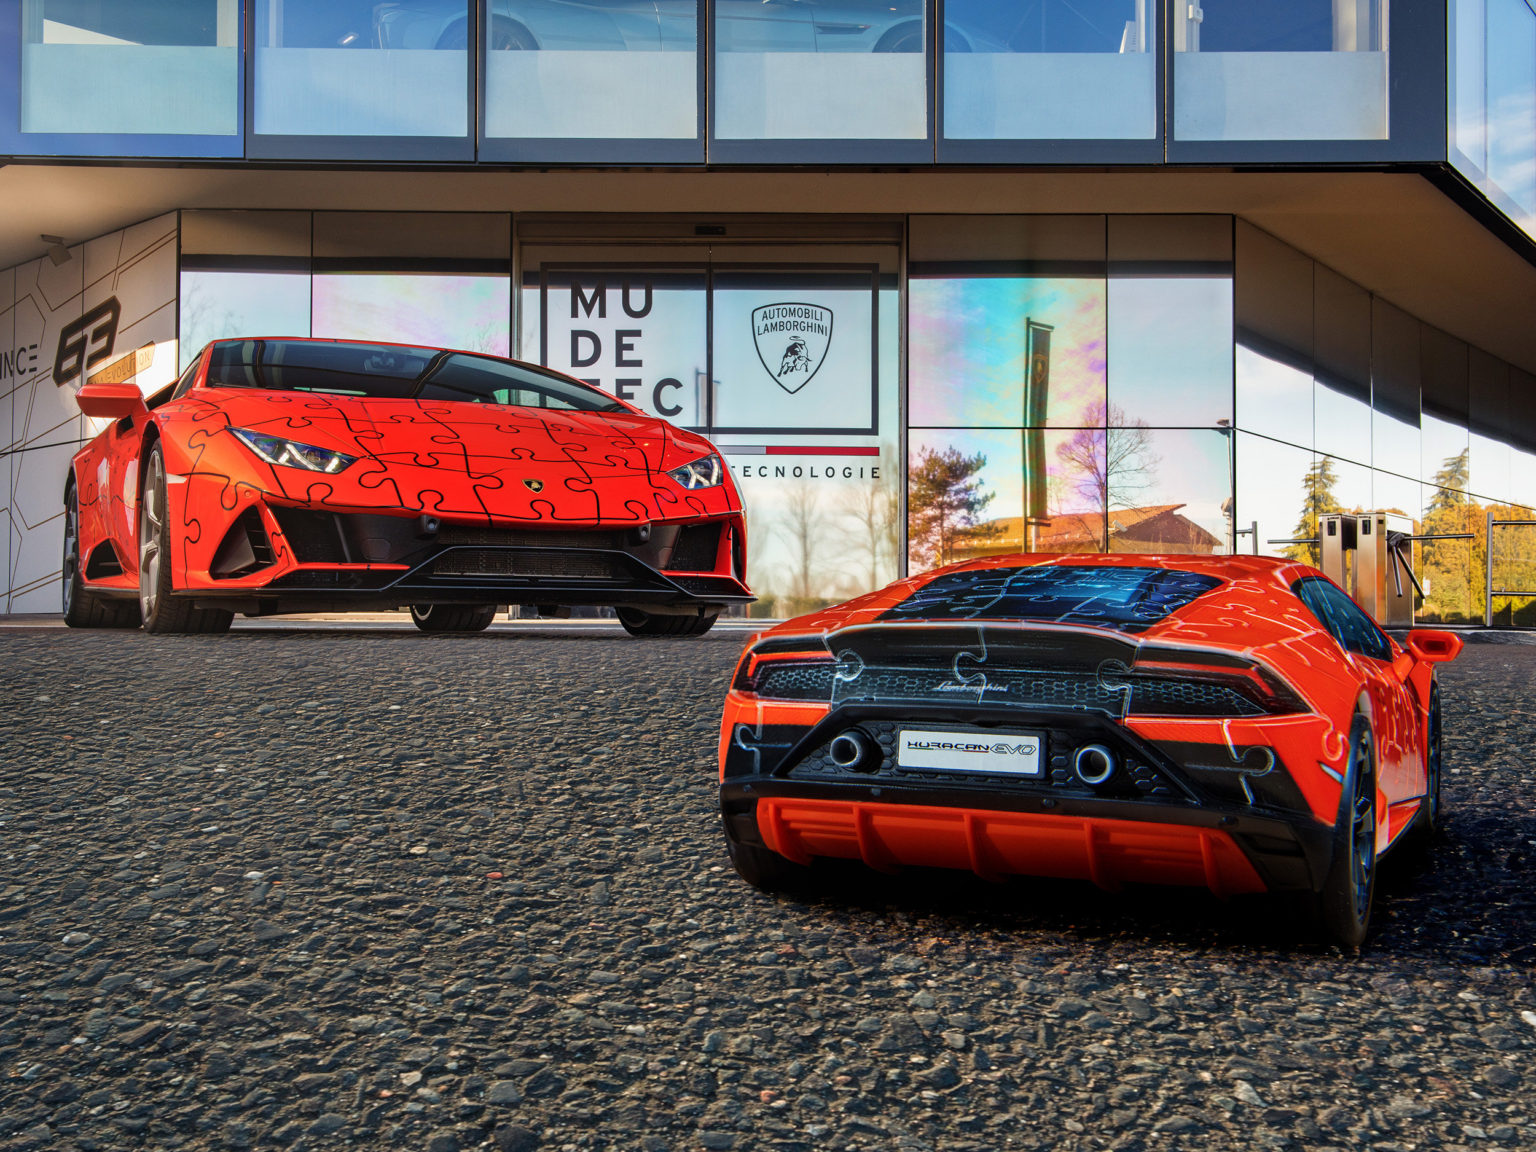 Famed puzzle maker Ravesburger has created a new Lamborghini-themed 3D puzzle.